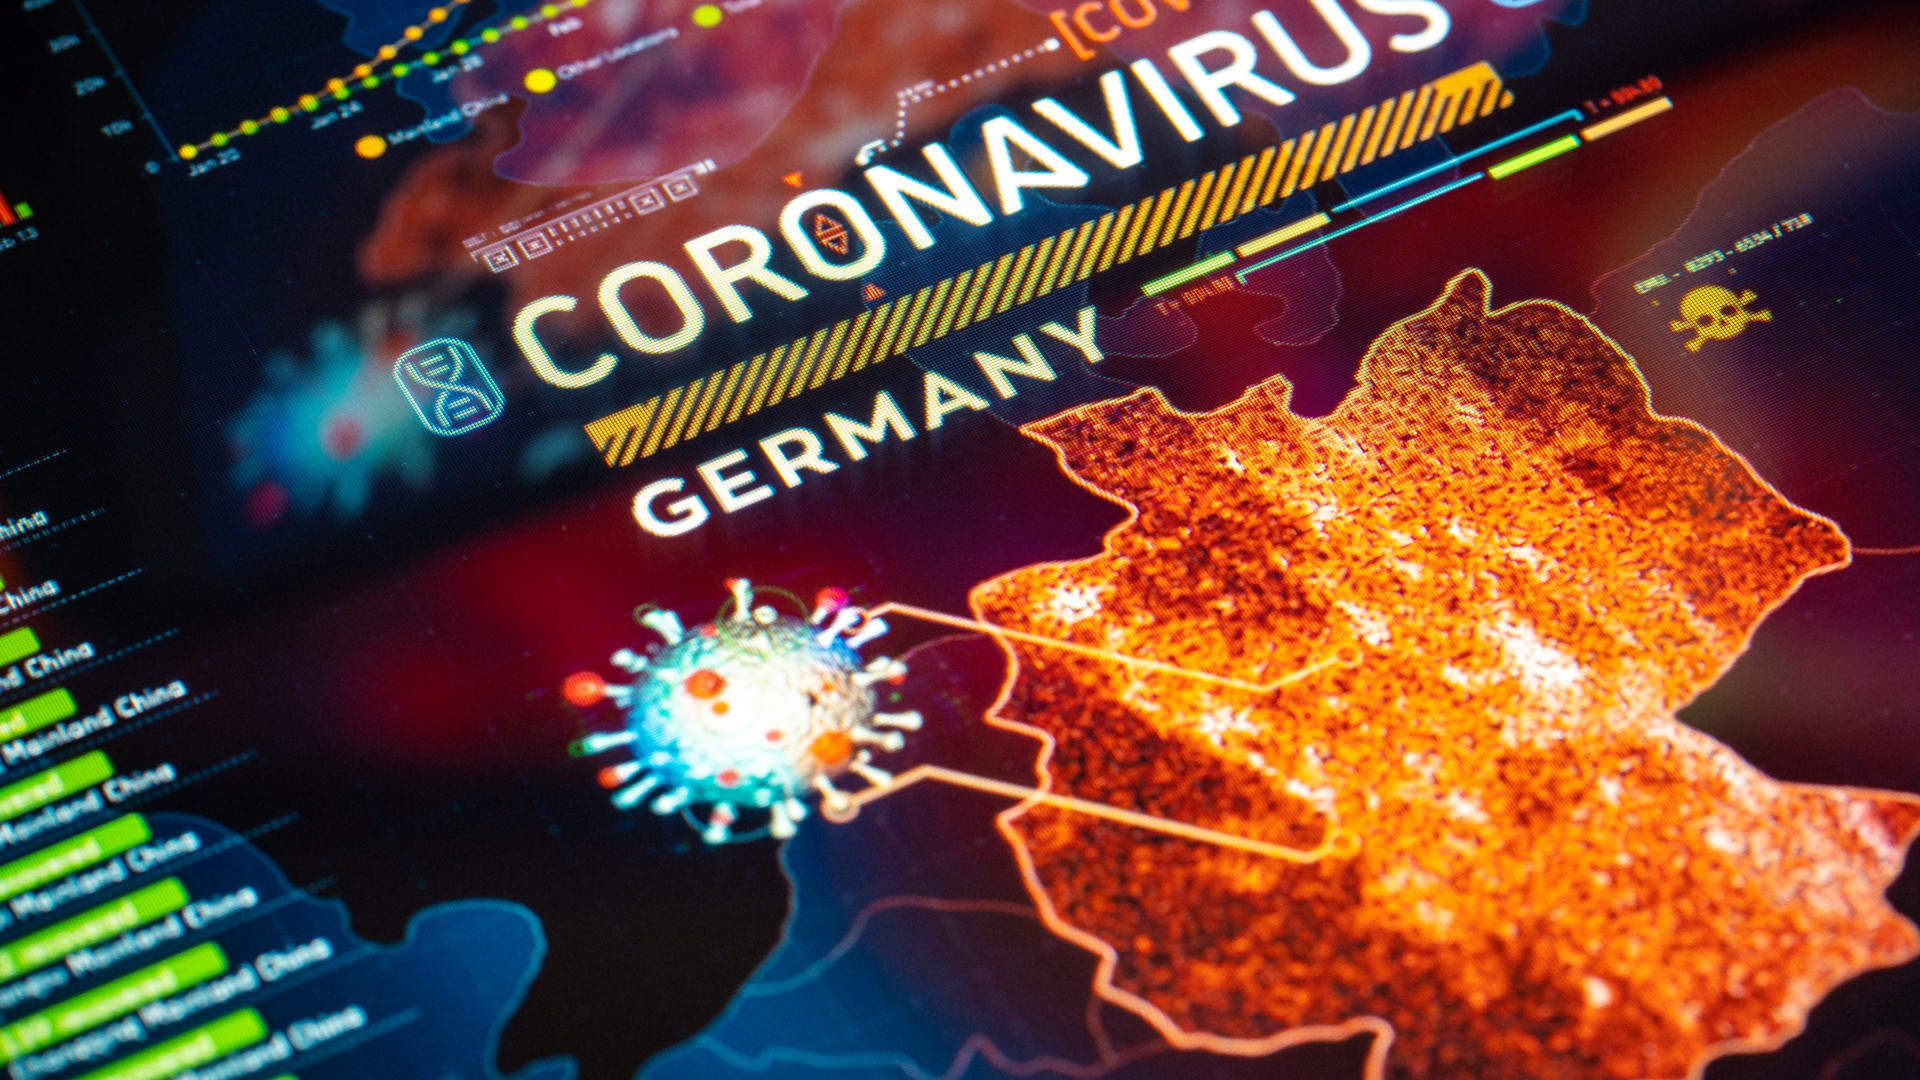 According to Germany, a third vaccination may be needed to stop the coronavirus epidemic